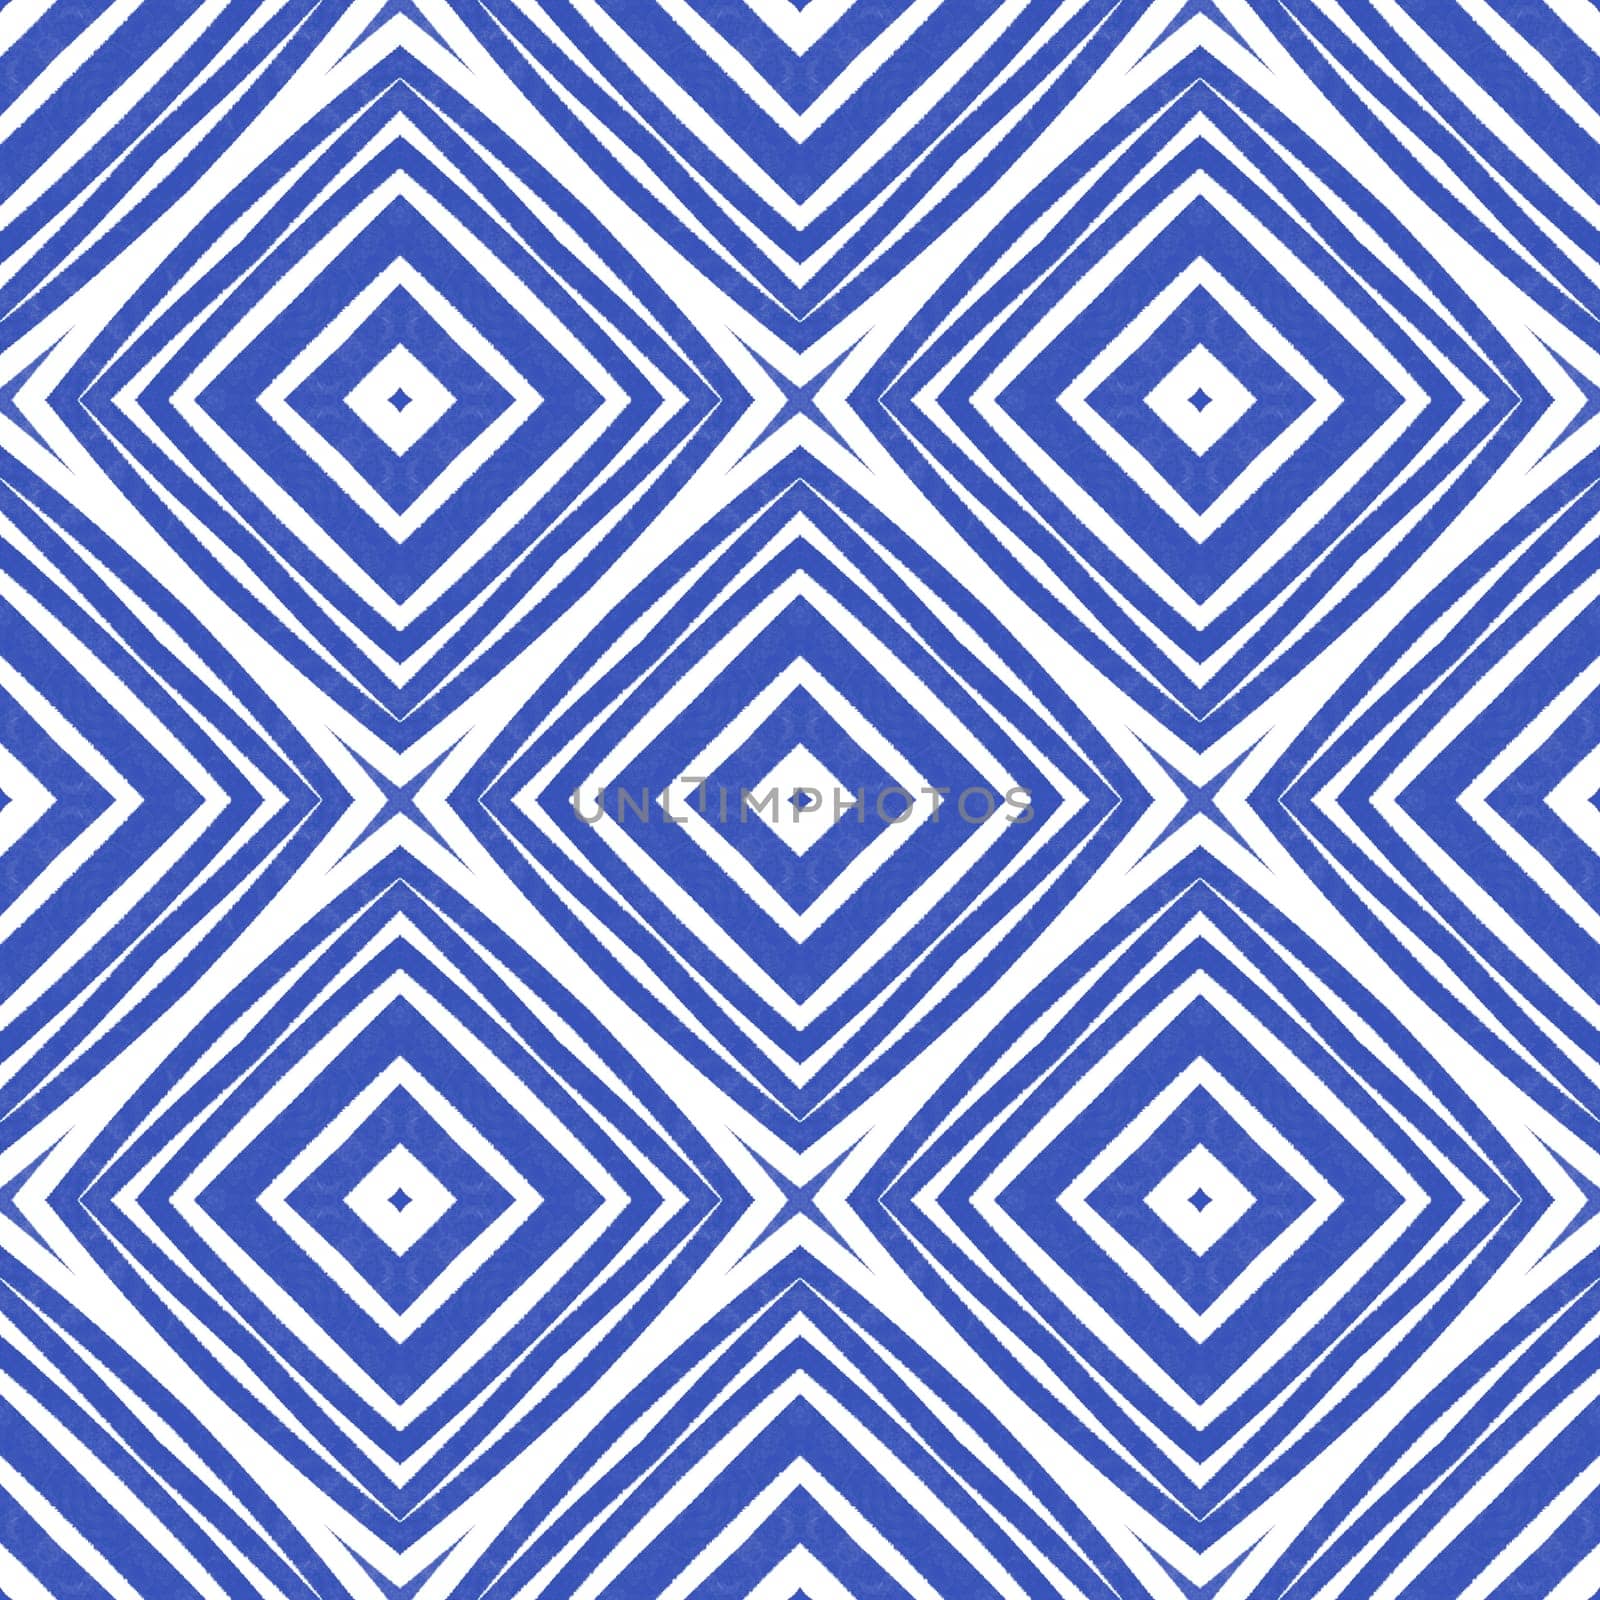 Tiled watercolor pattern. Indigo symmetrical kaleidoscope background. Hand painted tiled watercolor seamless. Textile ready extra print, swimwear fabric, wallpaper, wrapping.